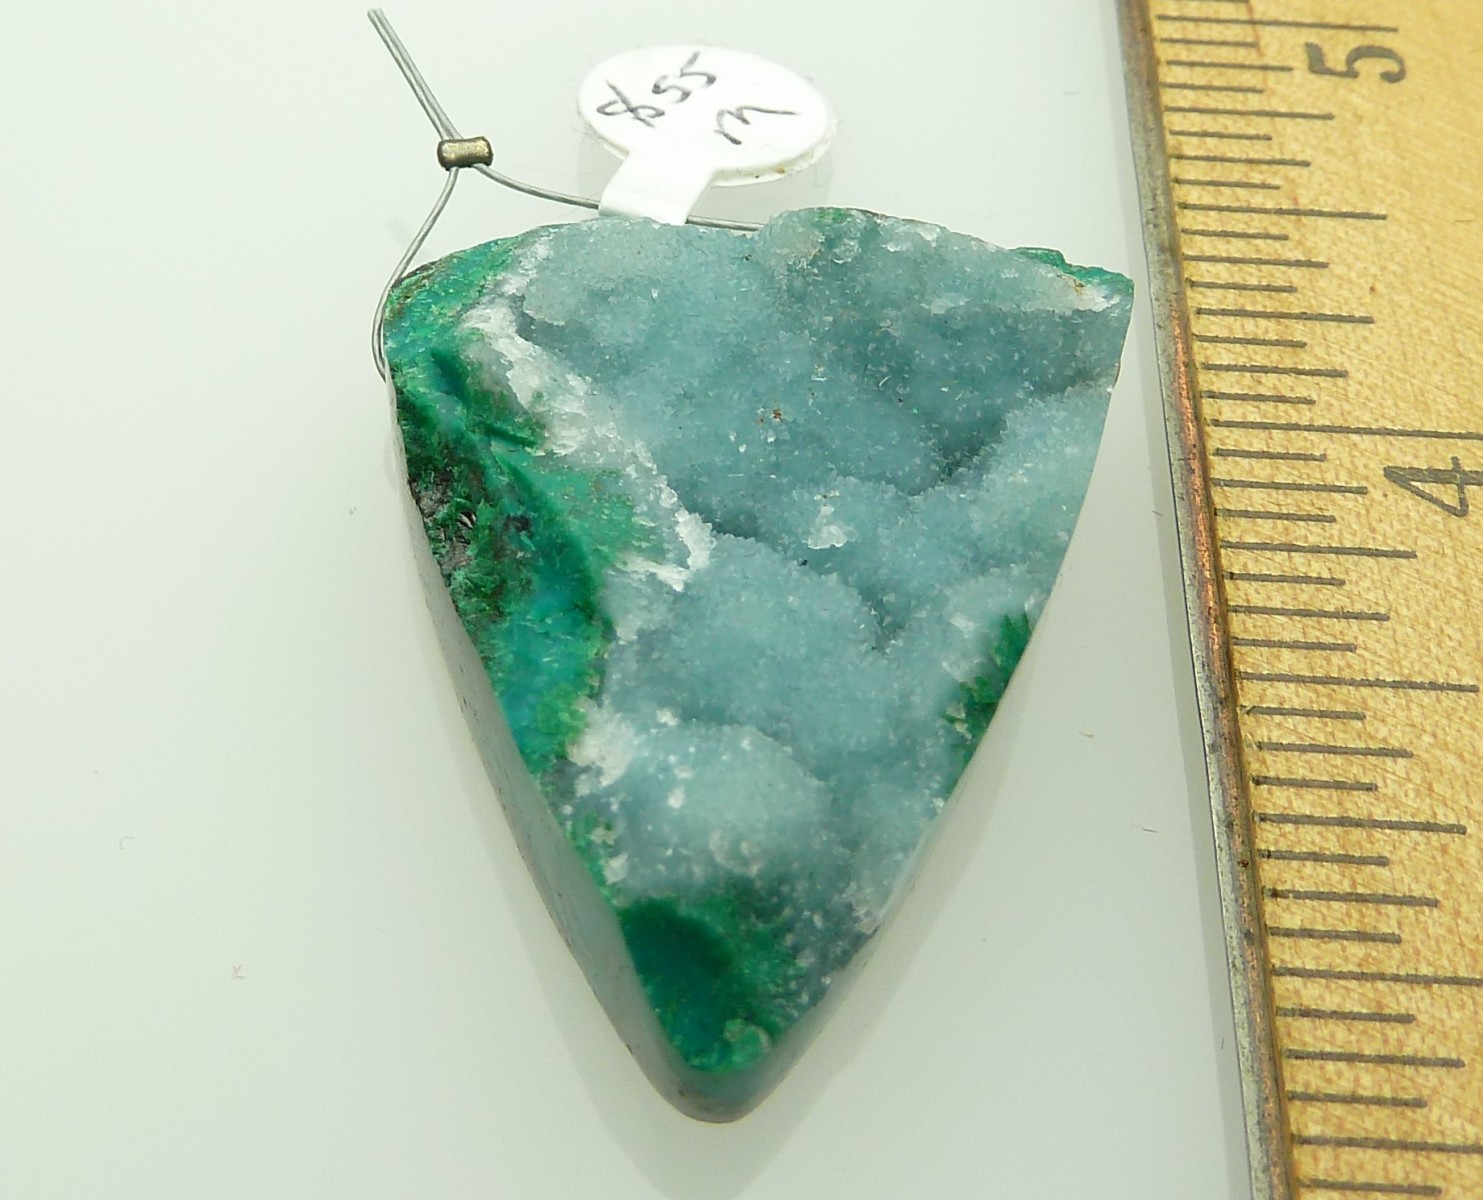 Scaled image P1010791.JPG: Item #Chryso2, Price $55.00 Handcut designer Chrysocolla and druzy quartz pendant bead. The druzy is a natural coating on top of the malalchite and chrysocolla. All sides except the top are polished. Bead is 37mm long by 31 mm wide at the top. Bead is drilled through the widest part of the stone. Drill hole size is about 2.5 mm. All this stone needs is a bail or leather strand to make a beautiful pendant. � 